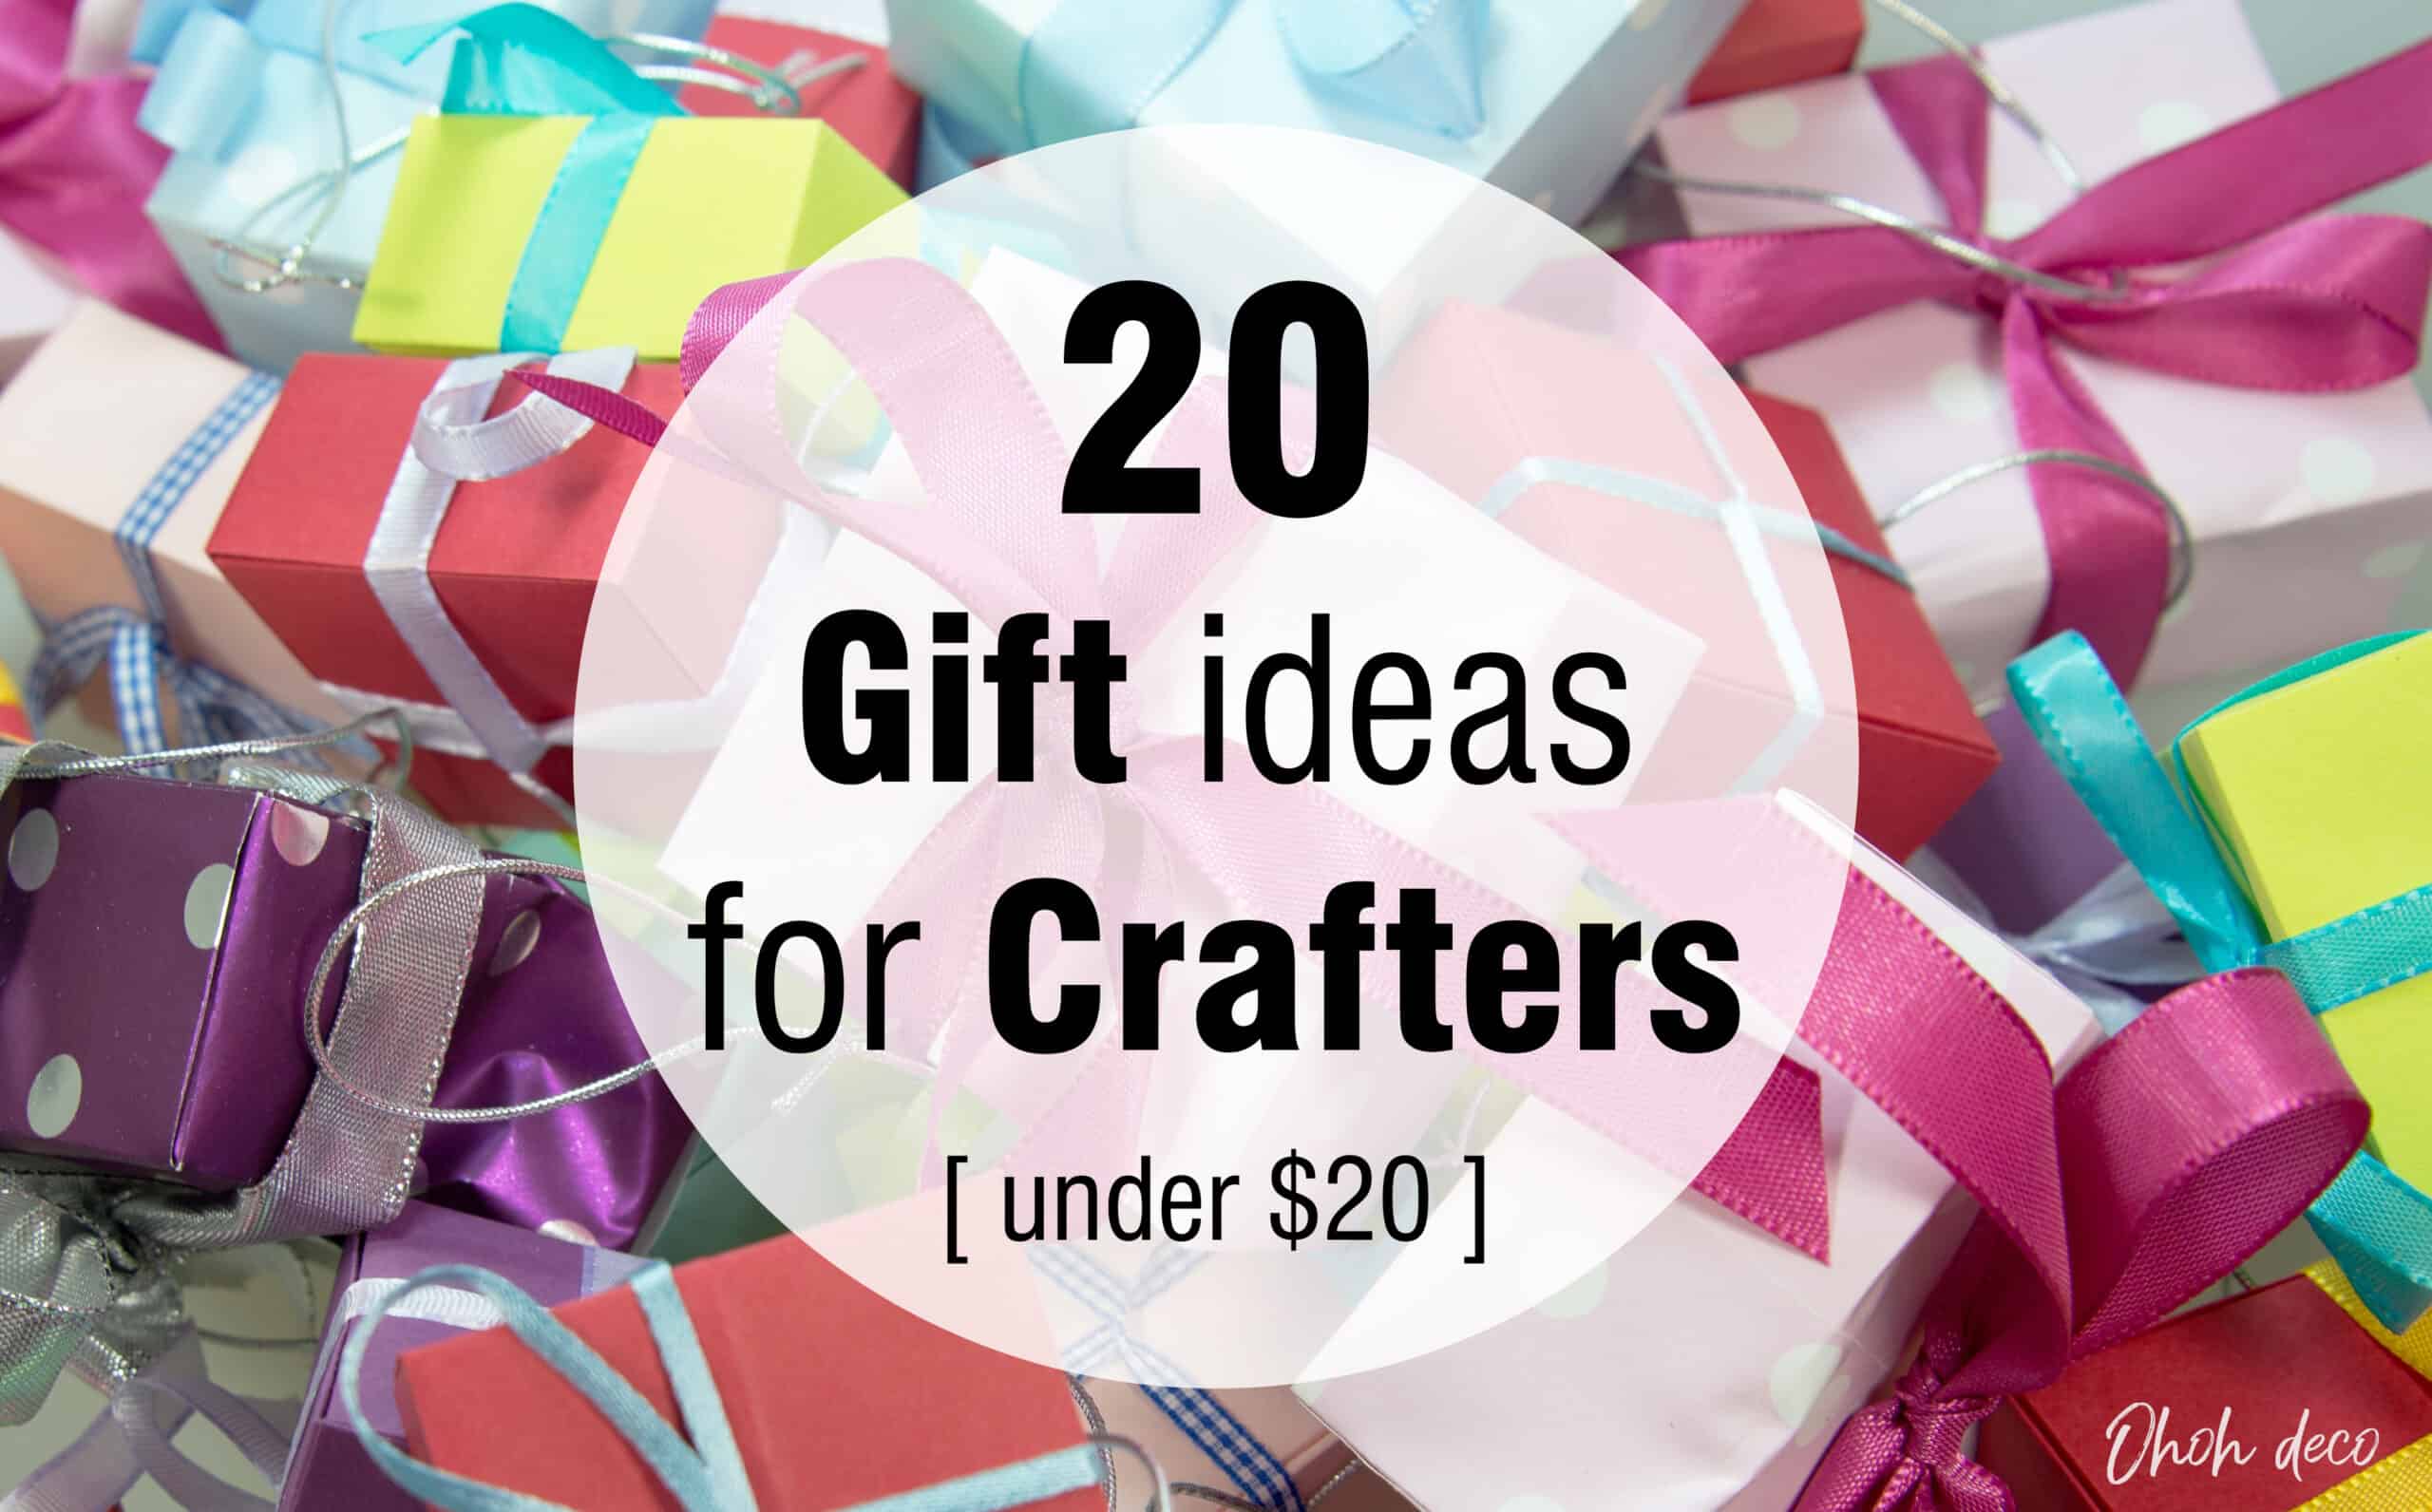 https://www.ohohdeco.com/wp-content/uploads/2022/12/20-gift-ideas-for-crafters-scaled.jpg